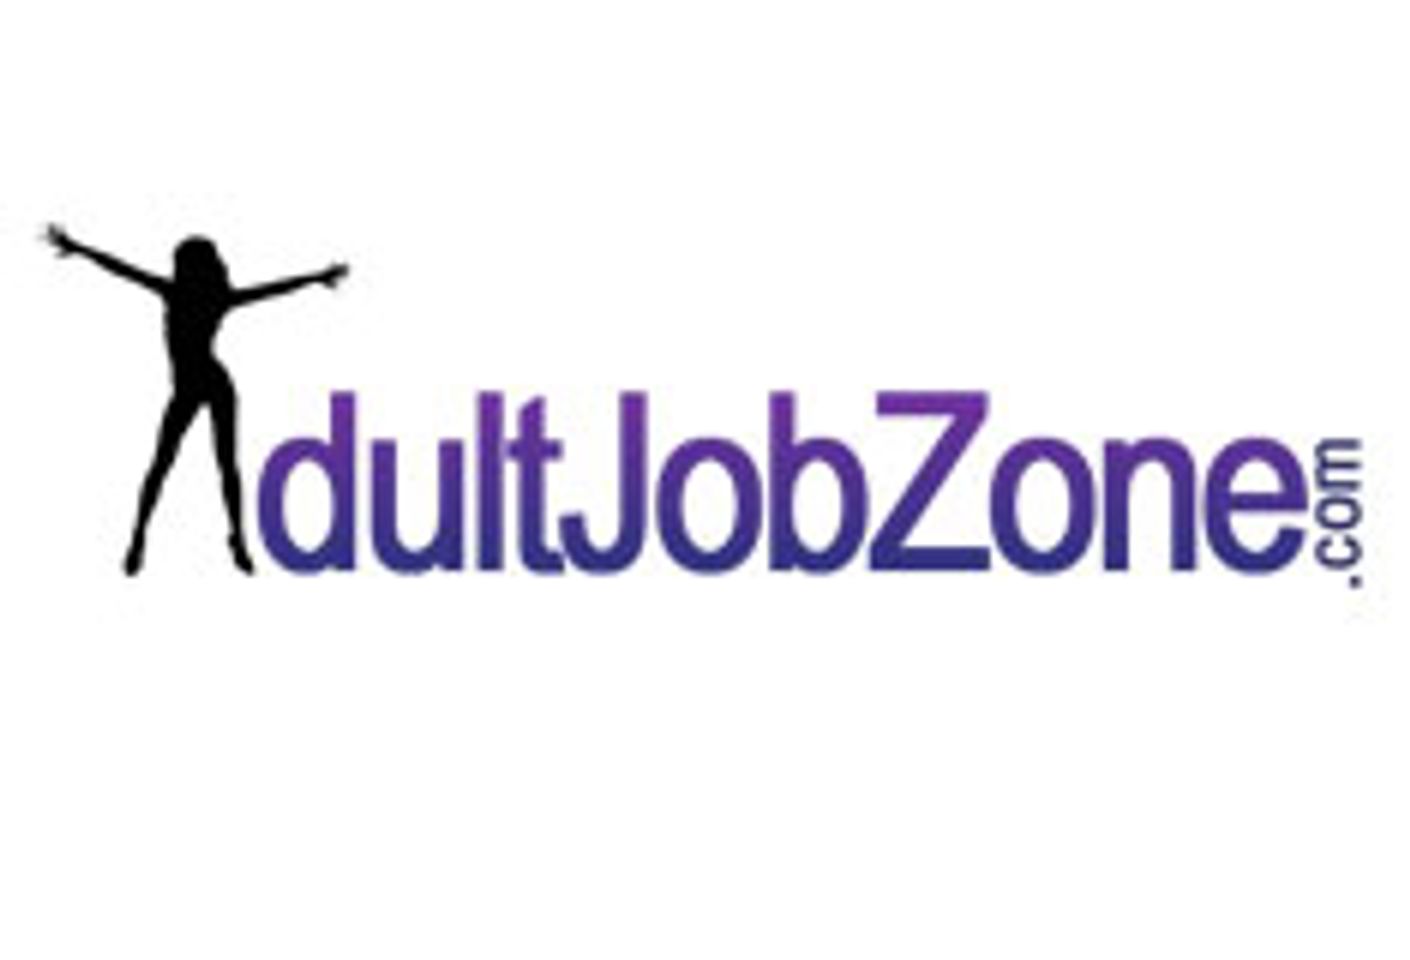 AdultJobZone.com Launches